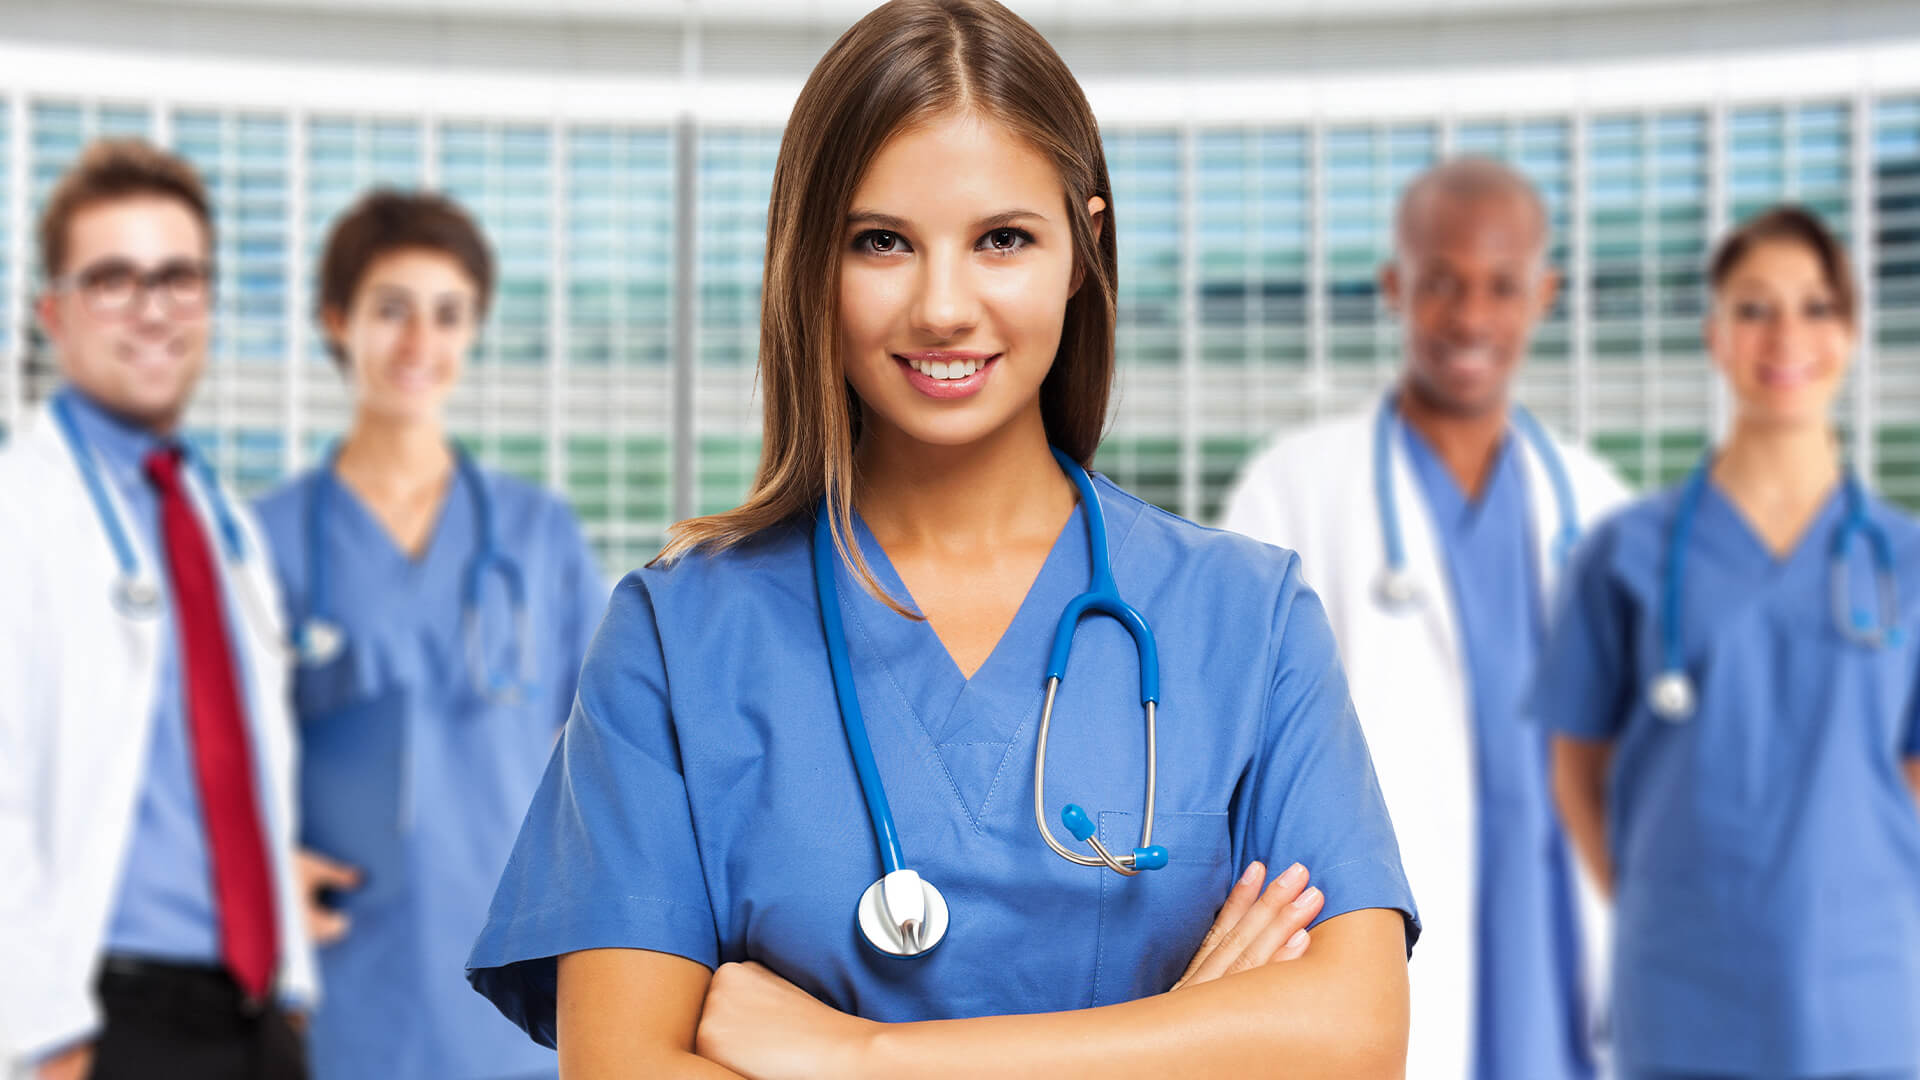 7 Considerations When Pursuing a Medical Career